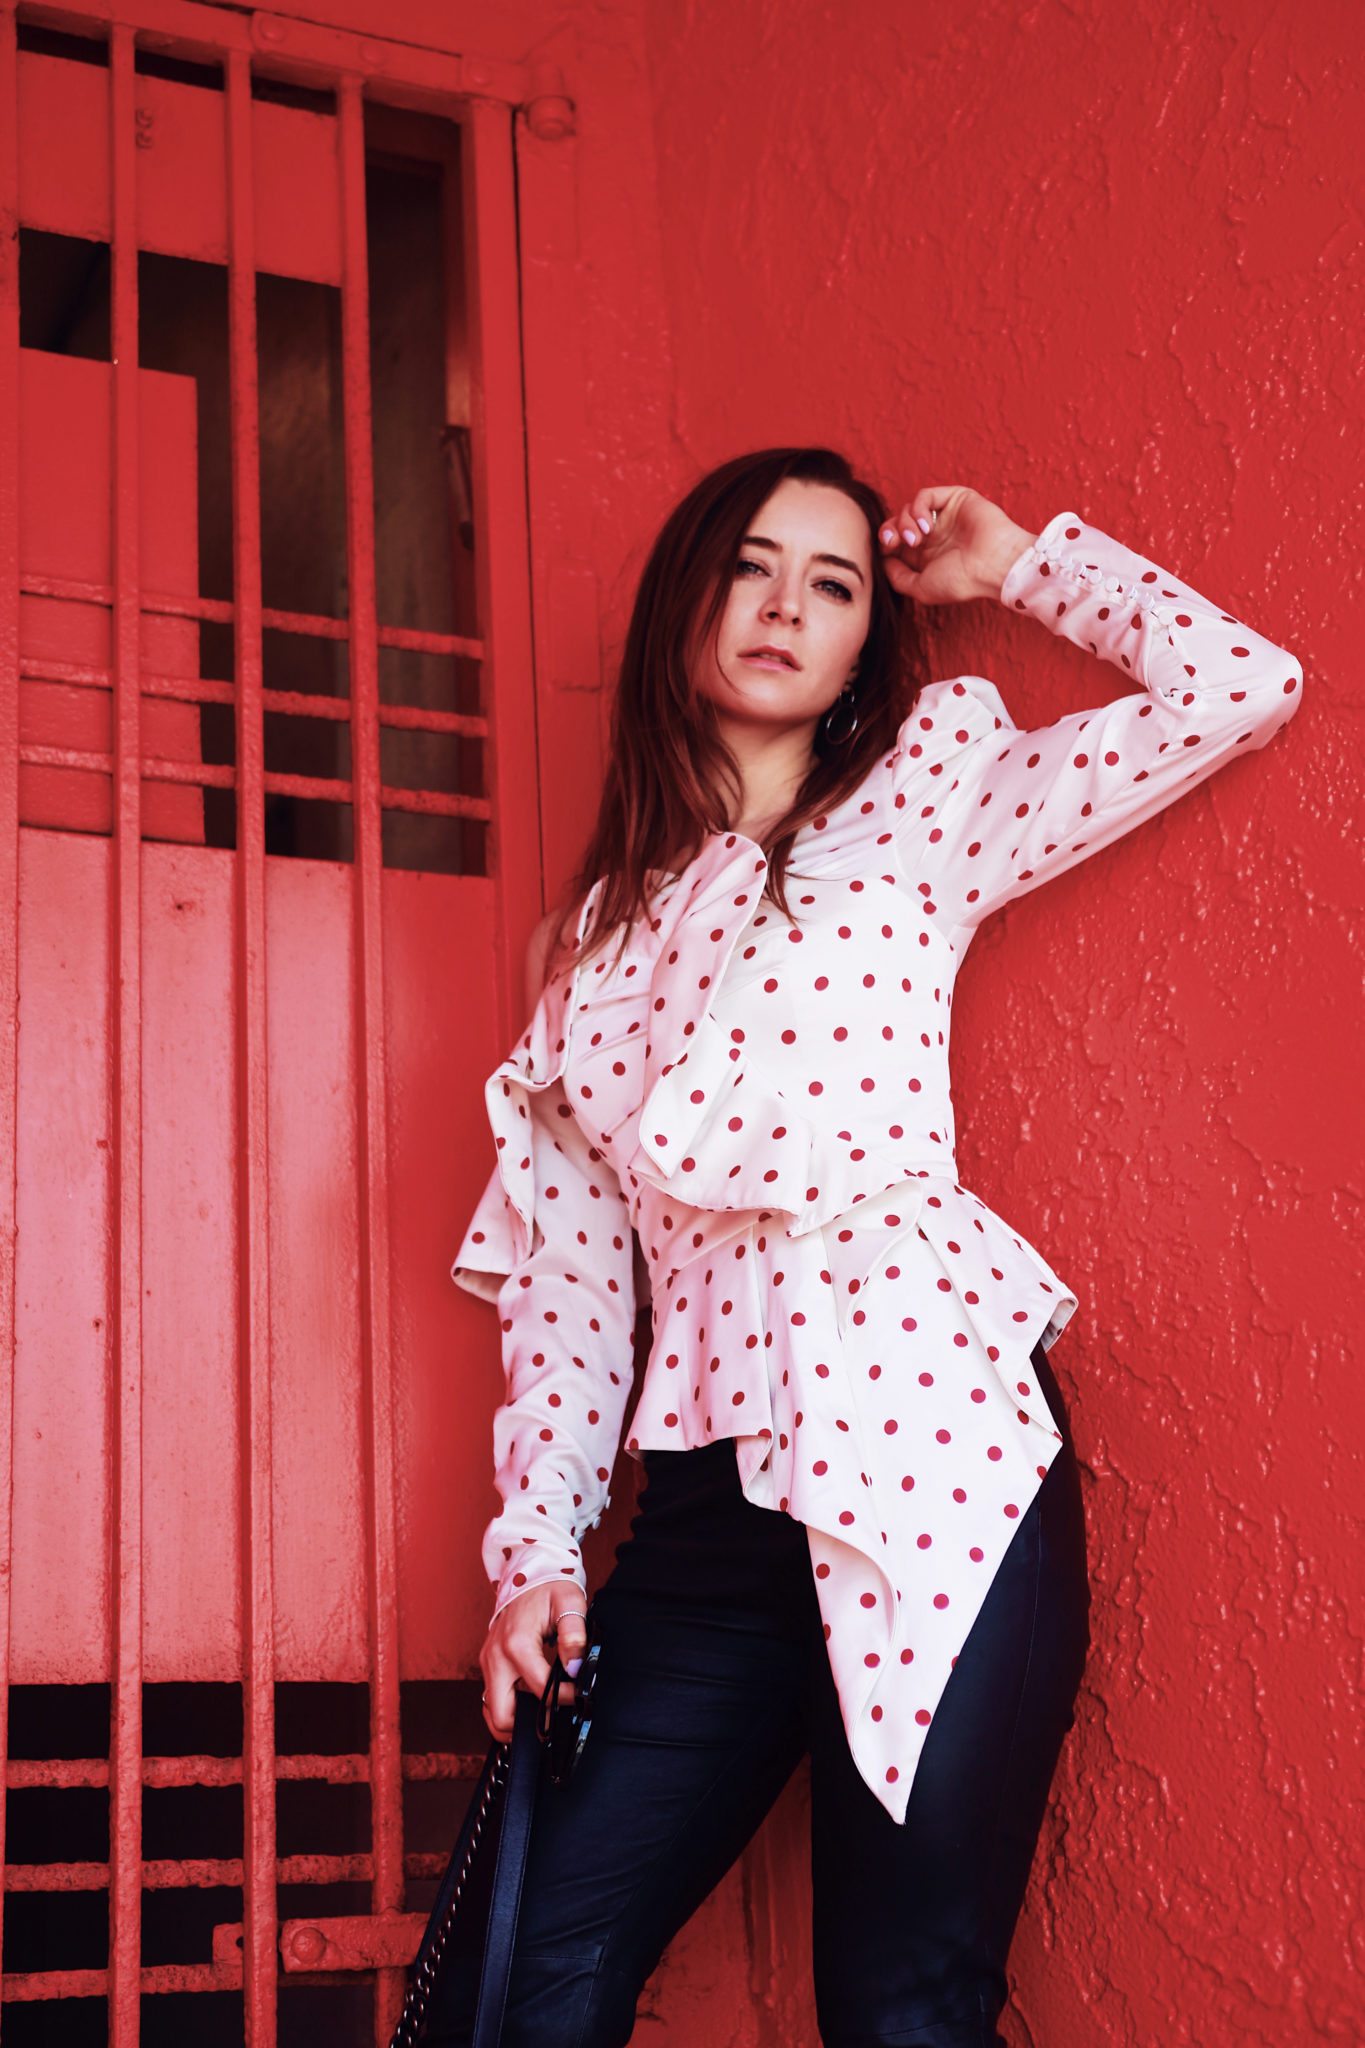 Evening tops: Statement blouse by Self Portrait via If Chic - More about this polka dots blouse on Houseofcomil.com